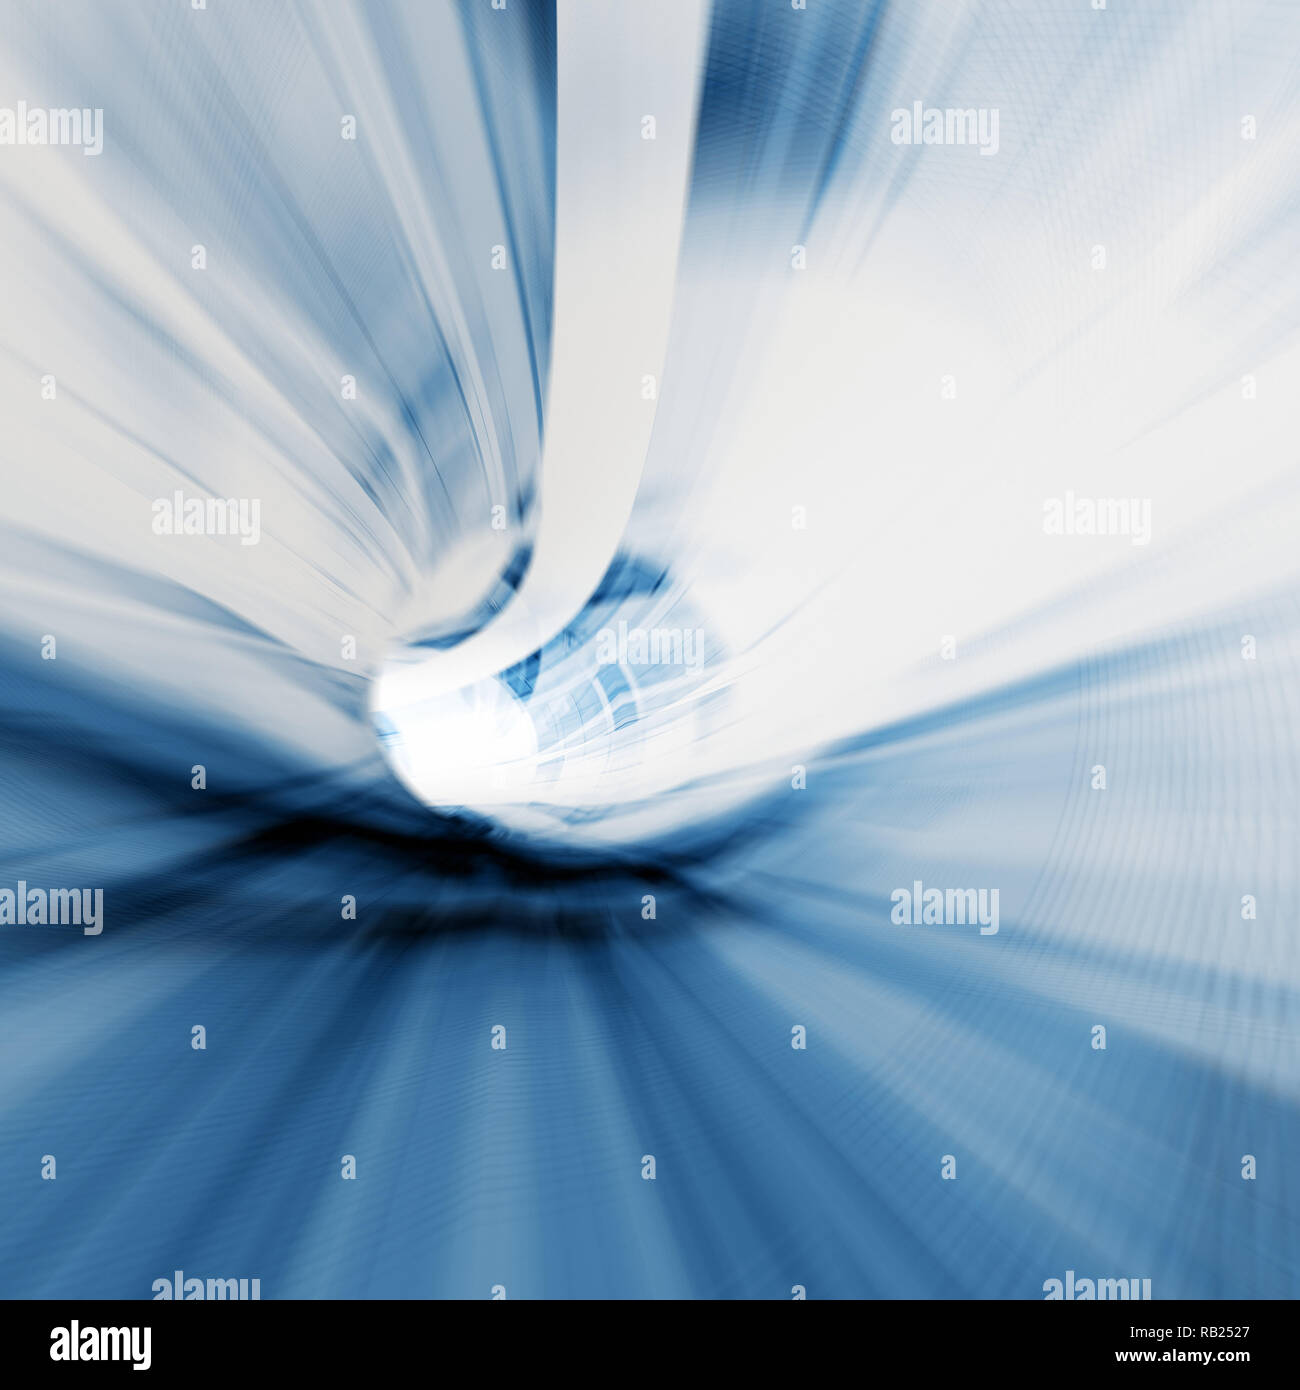 Blur abstract tunnel Stock Photo